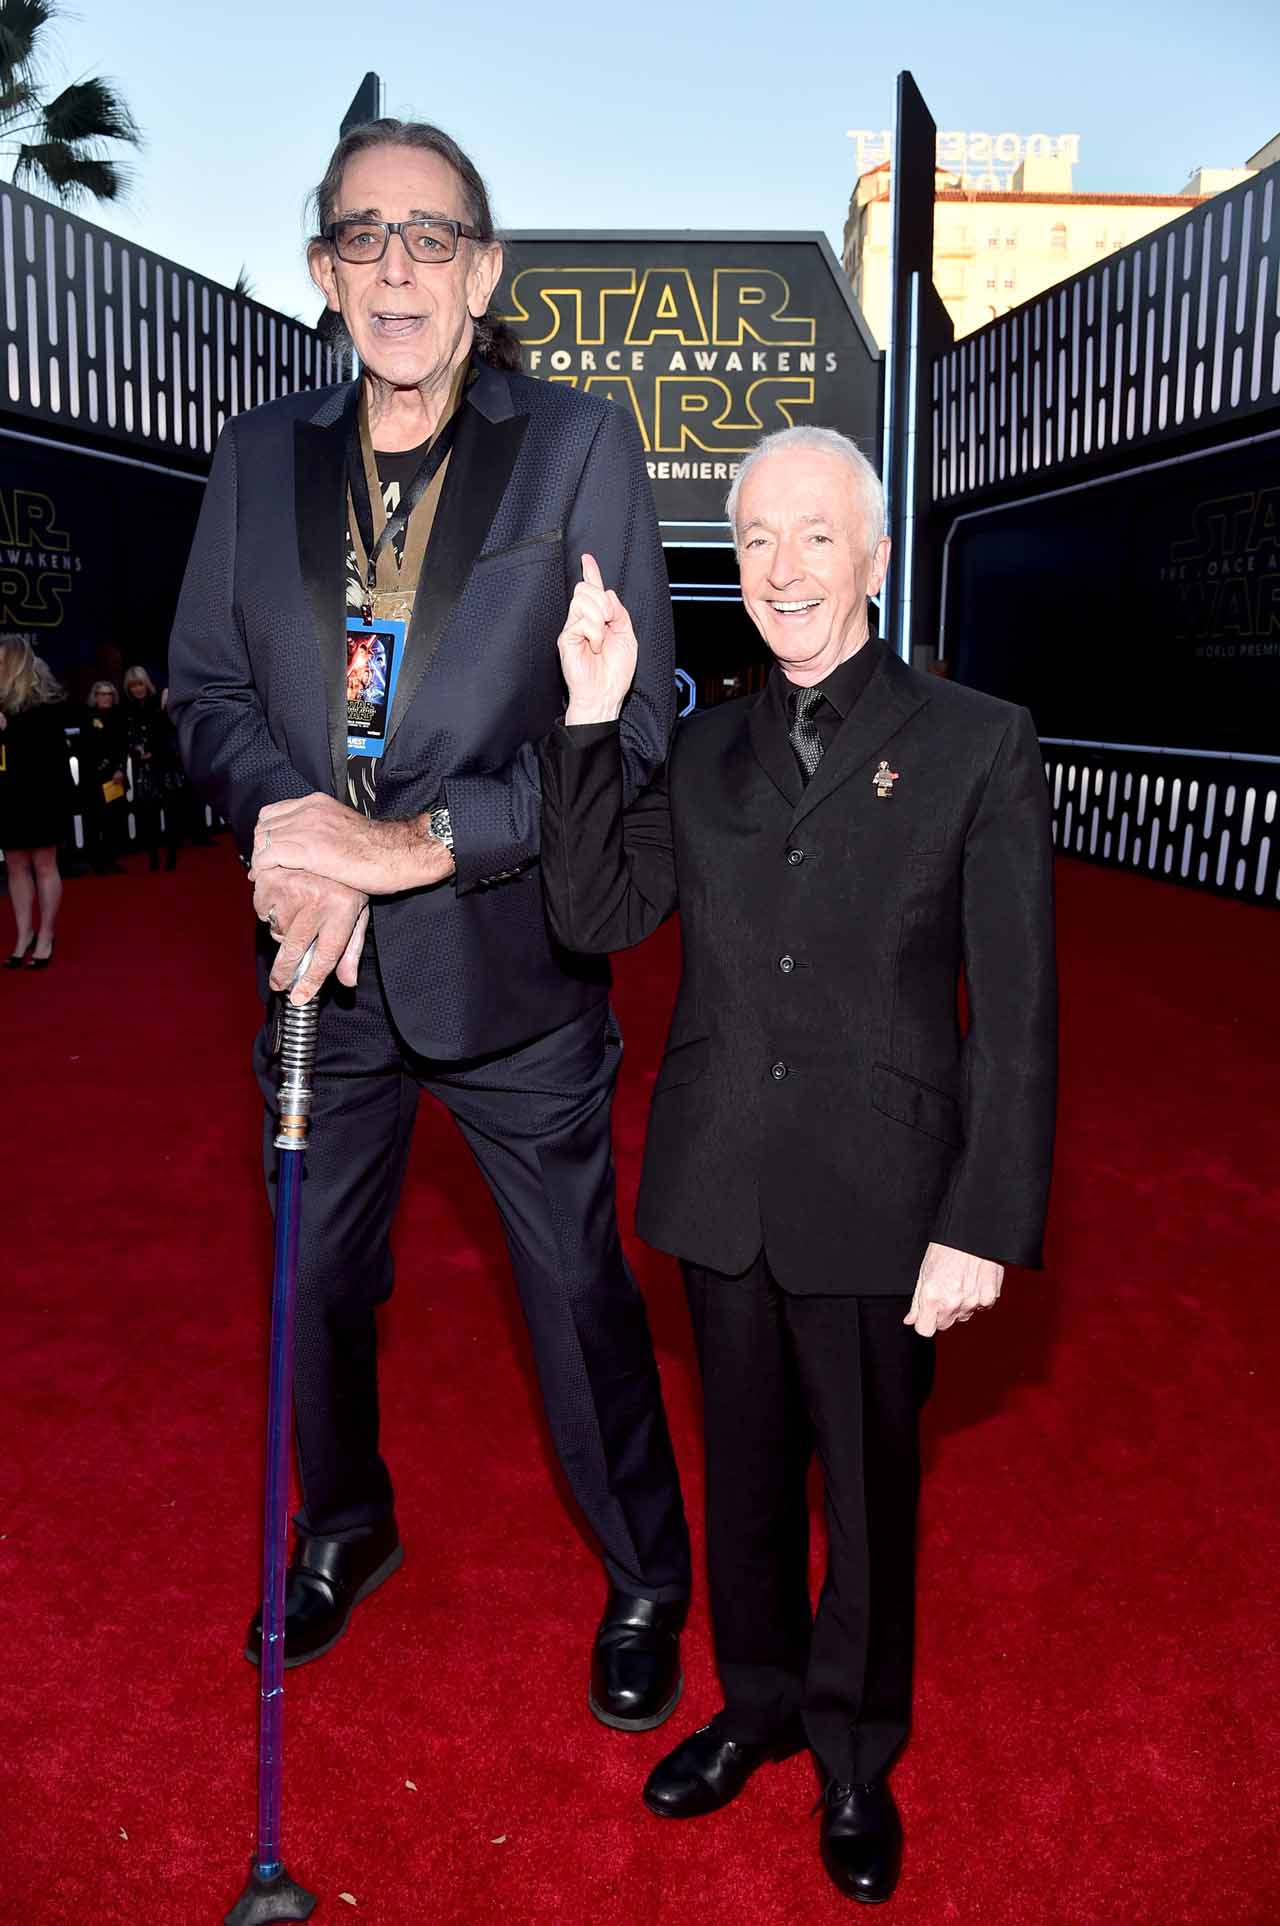 HOLLYWOOD, CA - DECEMBER 14:  Actors Peter Mayhew (L) and Anthony Daniels attend the World Premiere of ?Star Wars: The Force Awakens? at the Dolby, El Capitan, and TCL Theatres on December 14, 2015 in Hollywood, California.  (Photo by Alberto E. Rodriguez/Getty Images for Disney) *** Local Caption *** Peter Mayhew;Anthony Daniels